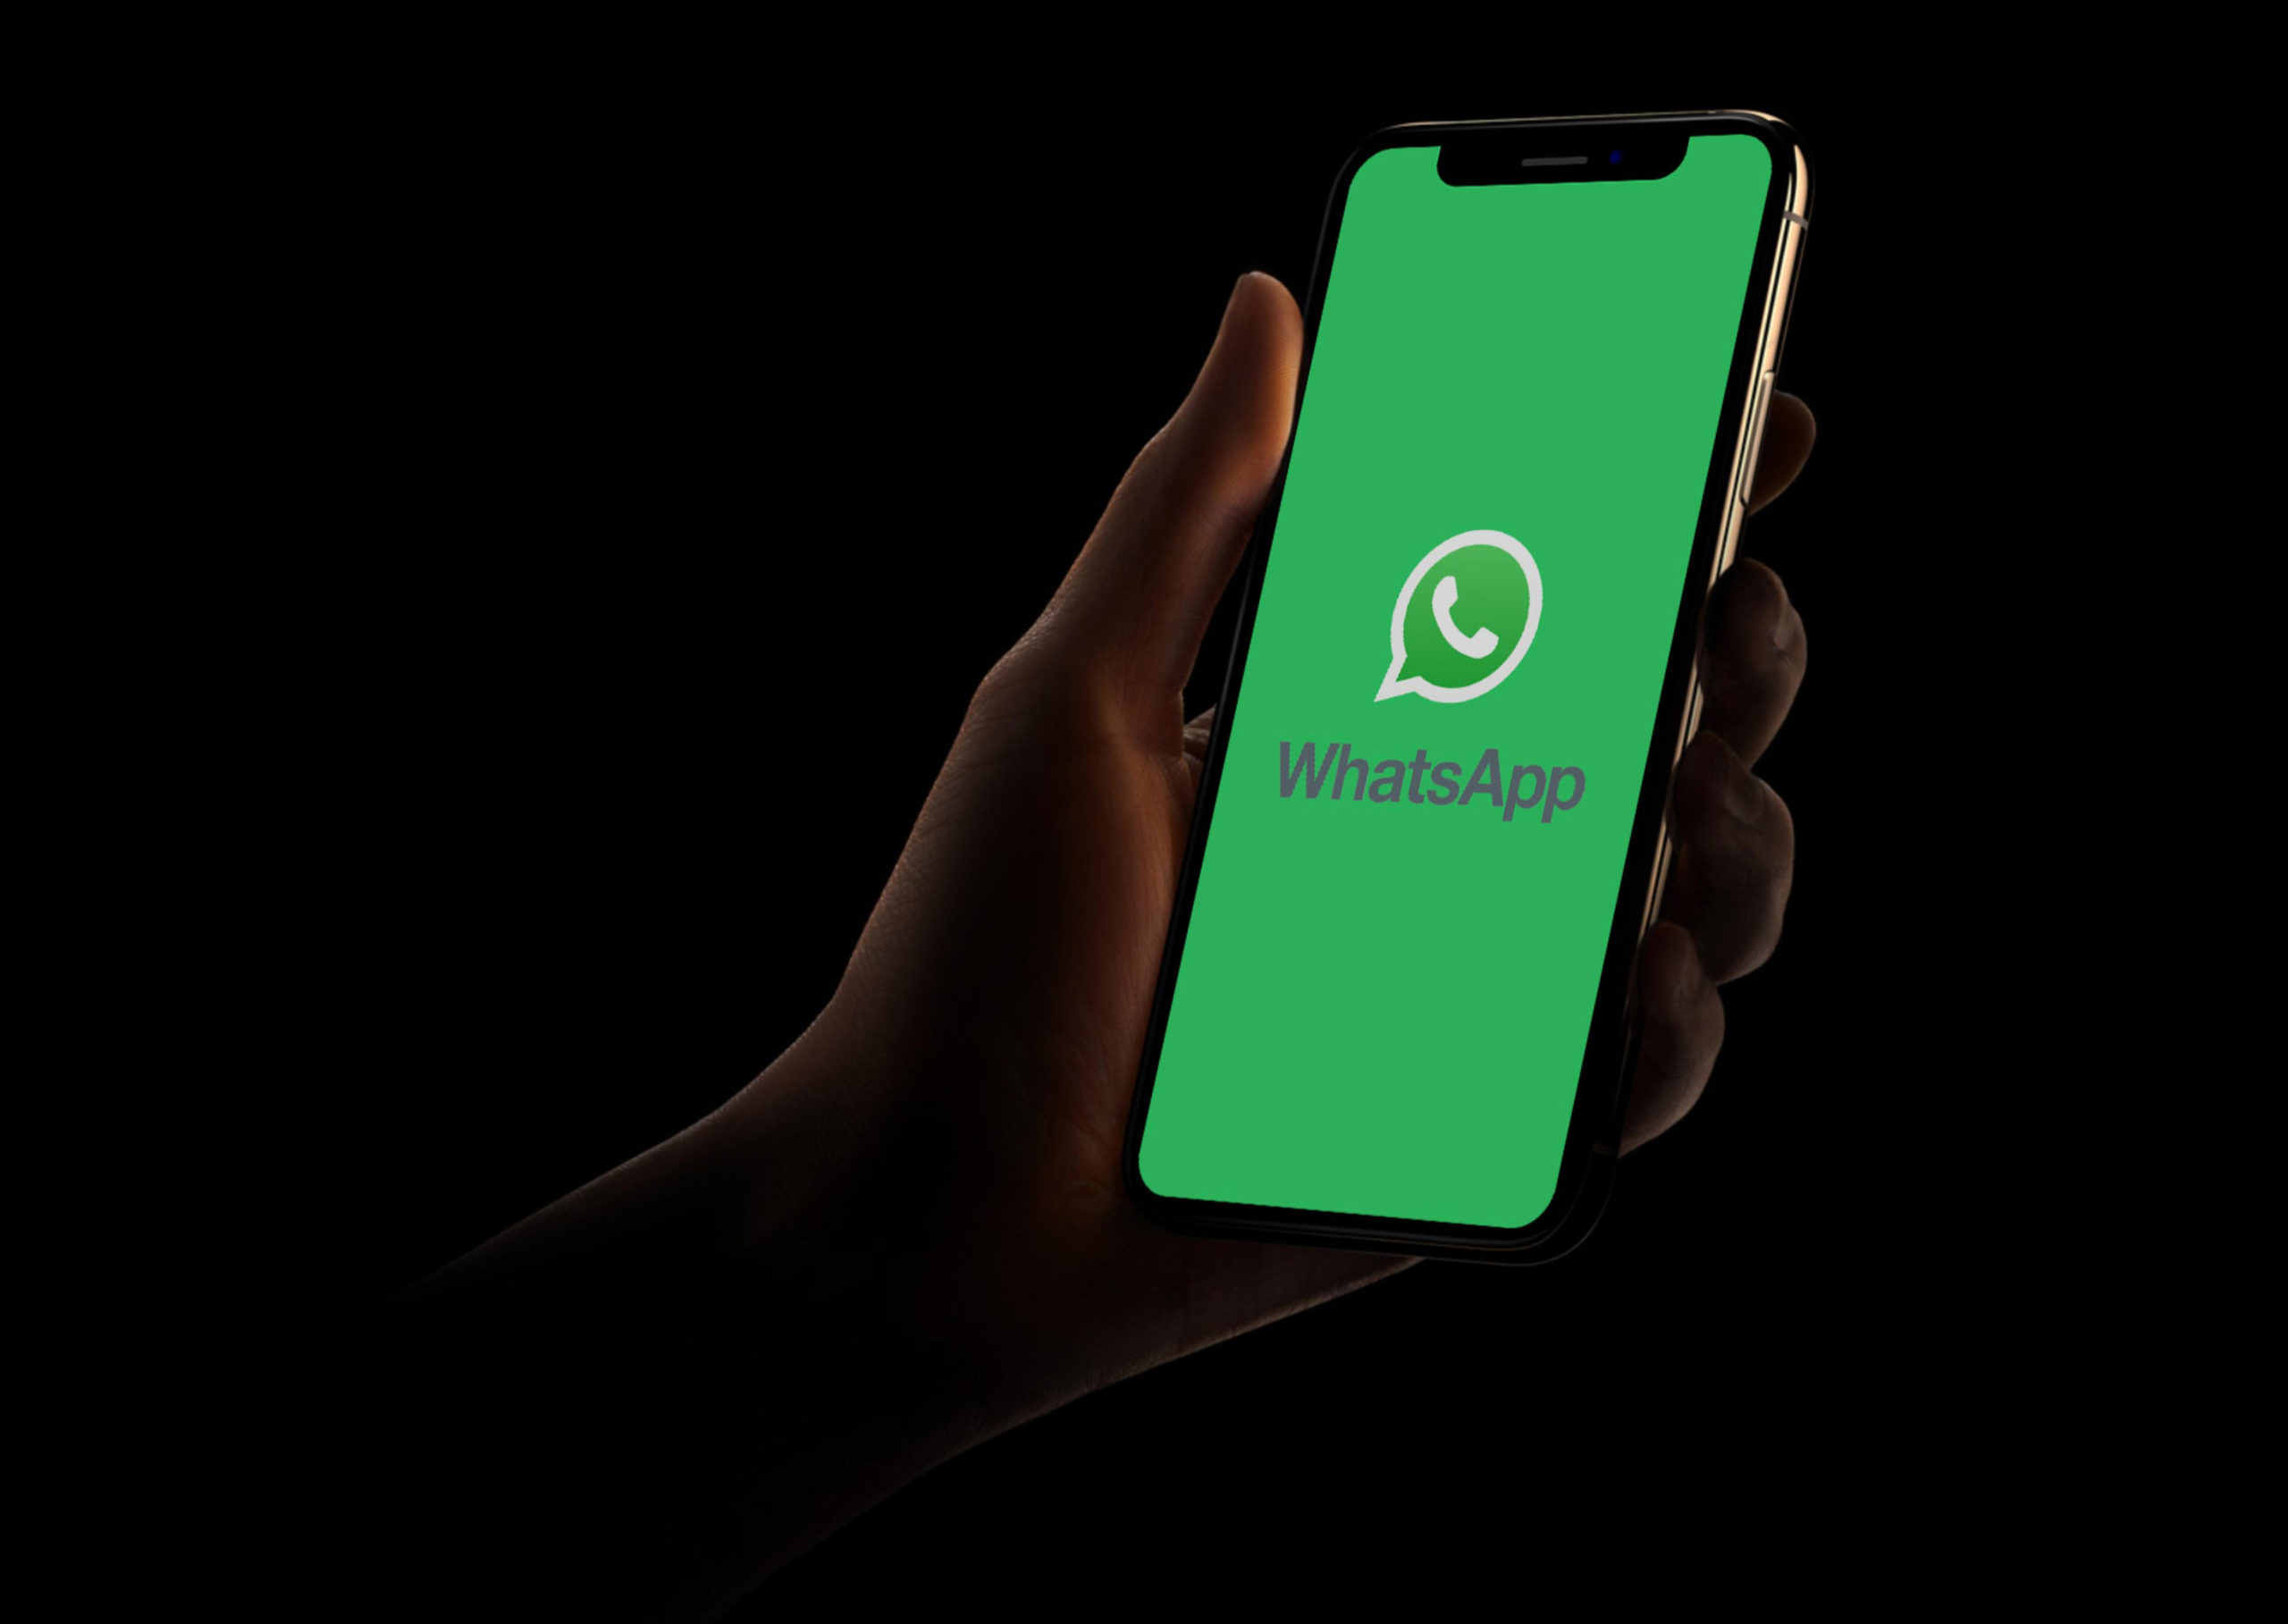 Trick to not clog your phone memory with WhatsApp images